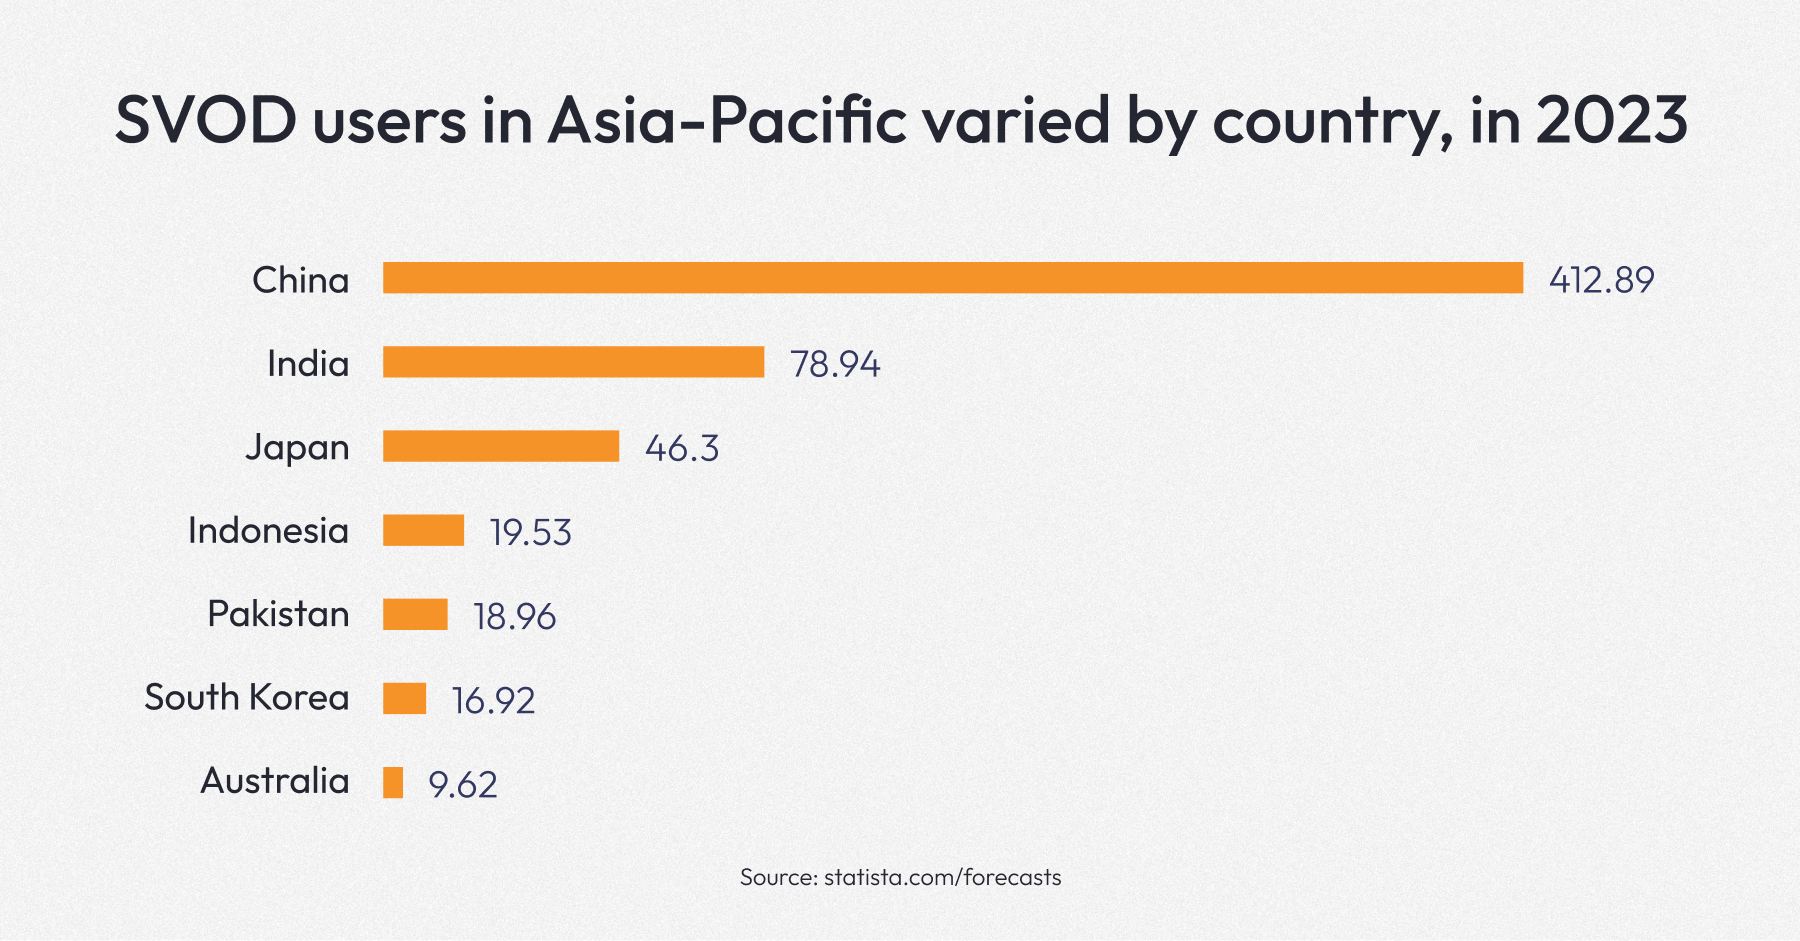 SVOD users in Asia-Pacific varied by country, in 2023 (in millions)